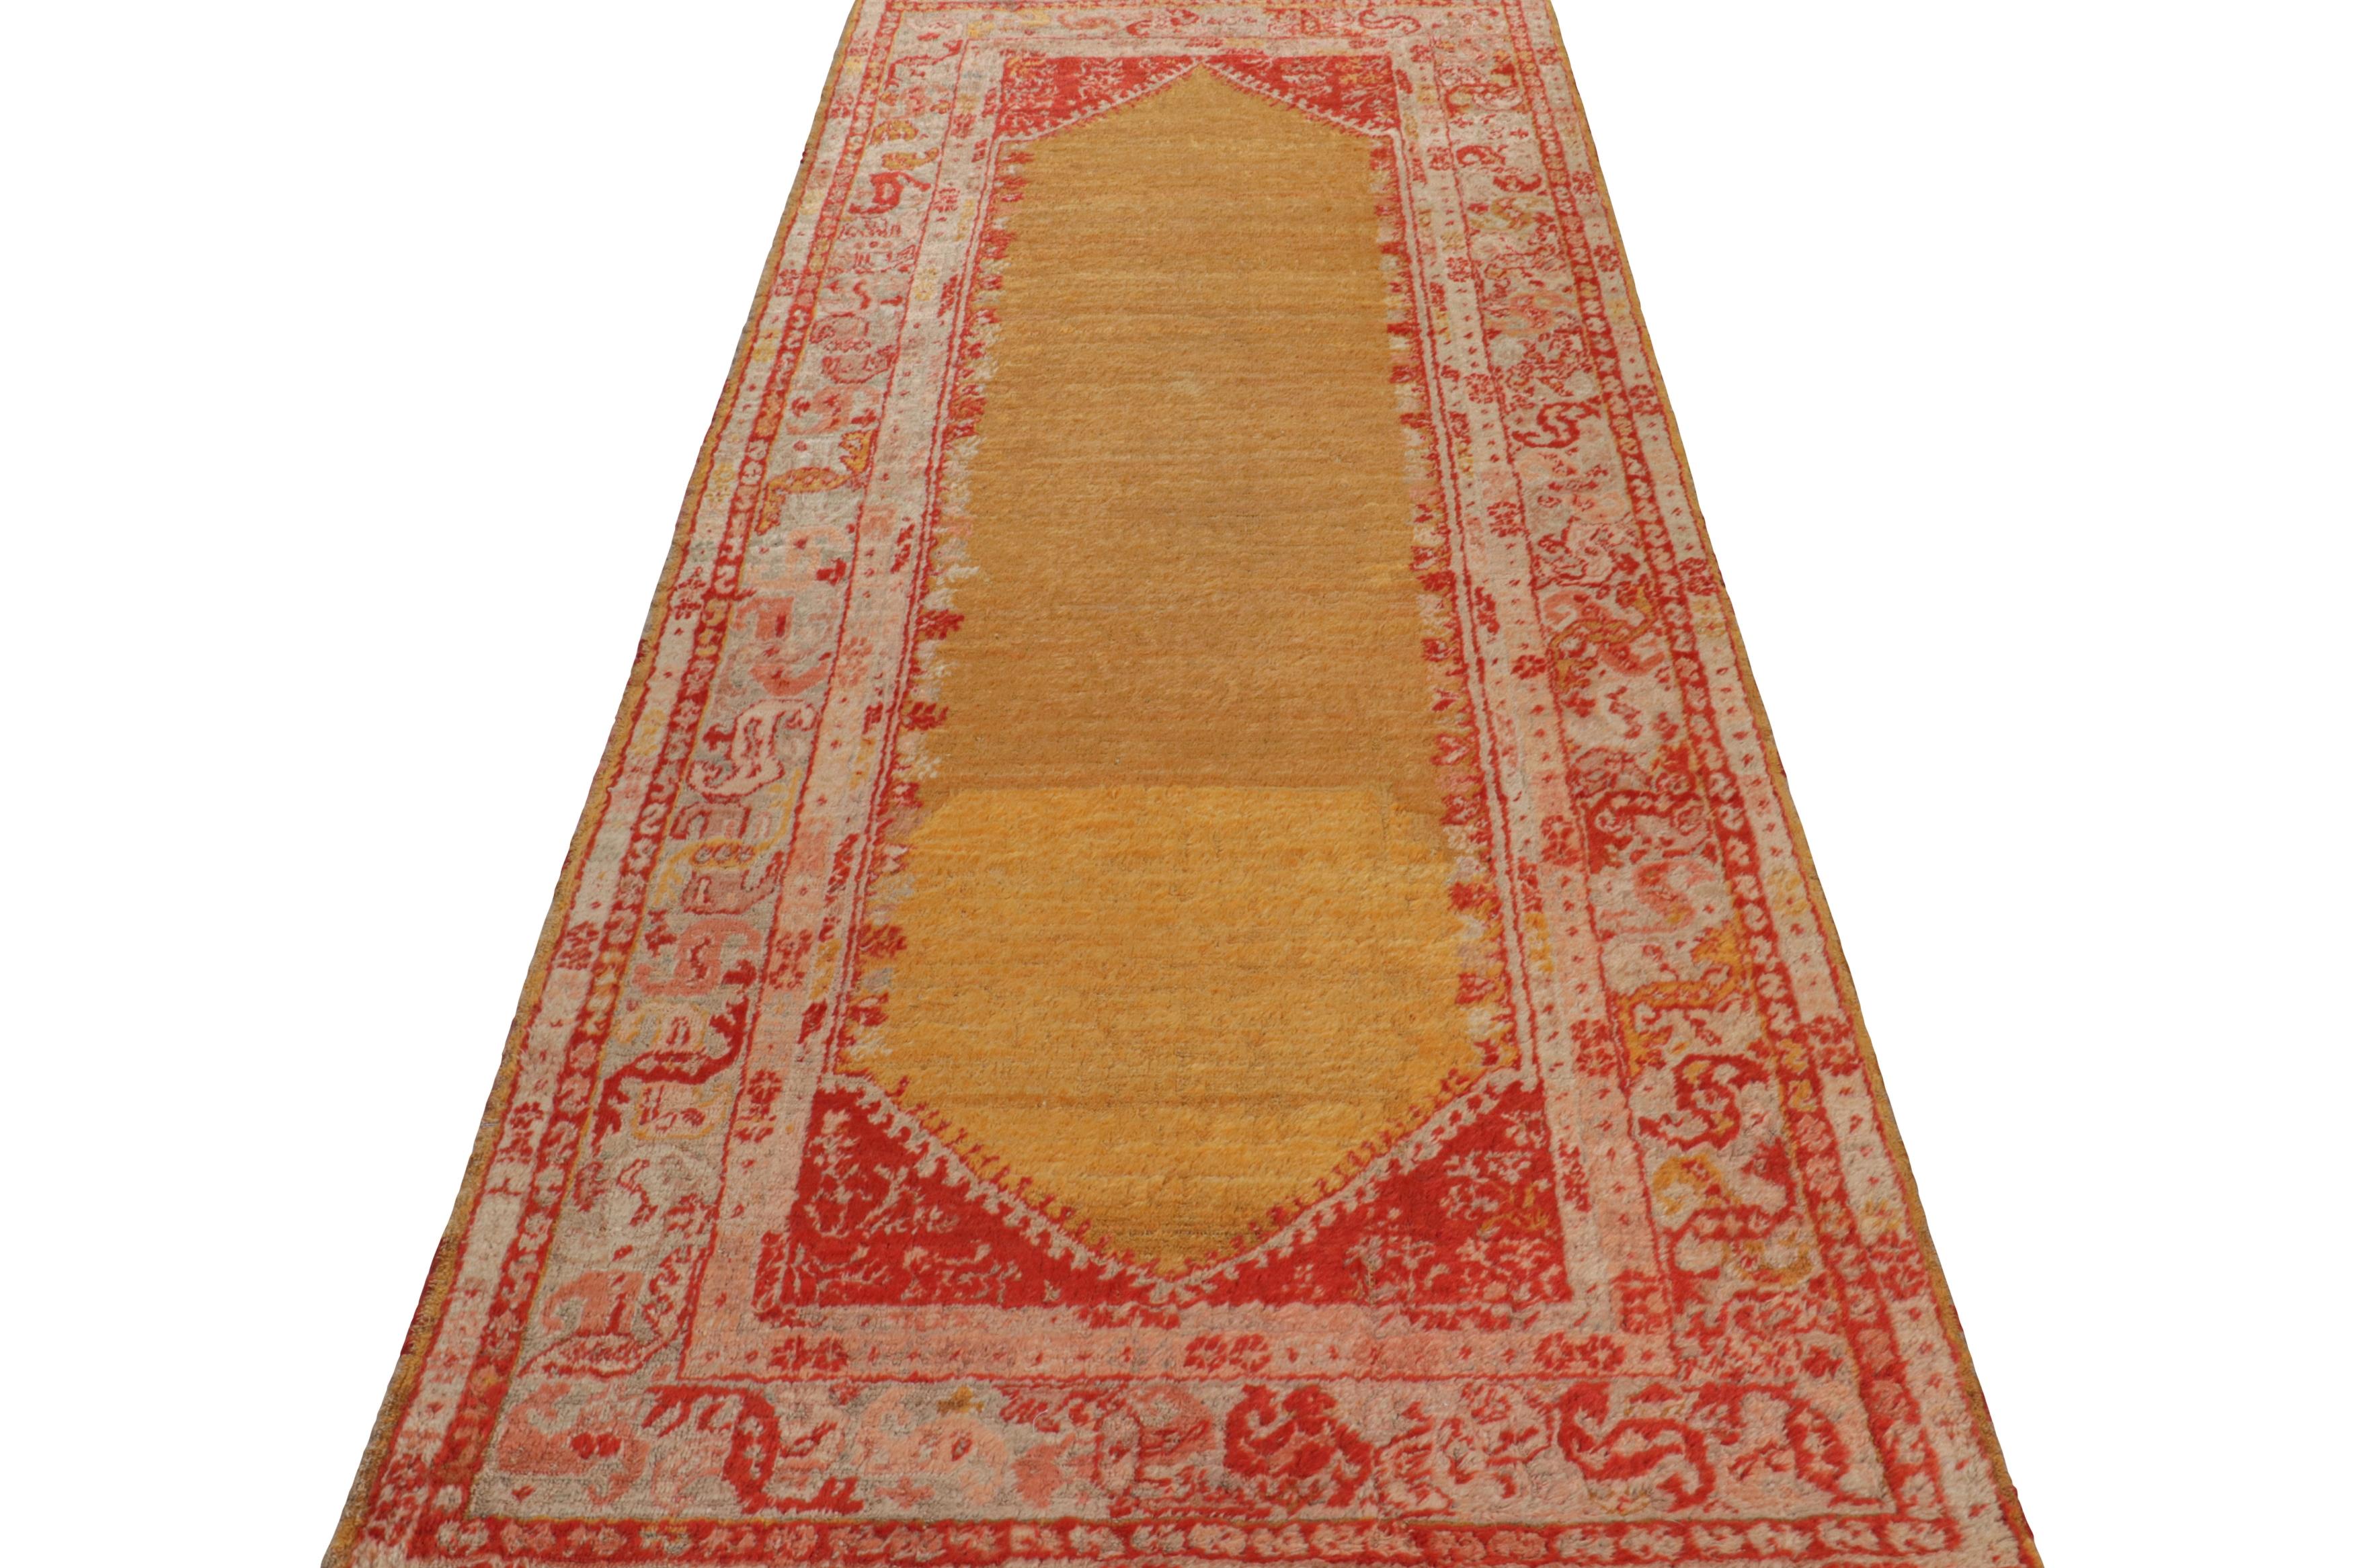 Antique Oushak Red and Gold Angora Wool Rug by Rug & Kilim In Good Condition For Sale In Long Island City, NY